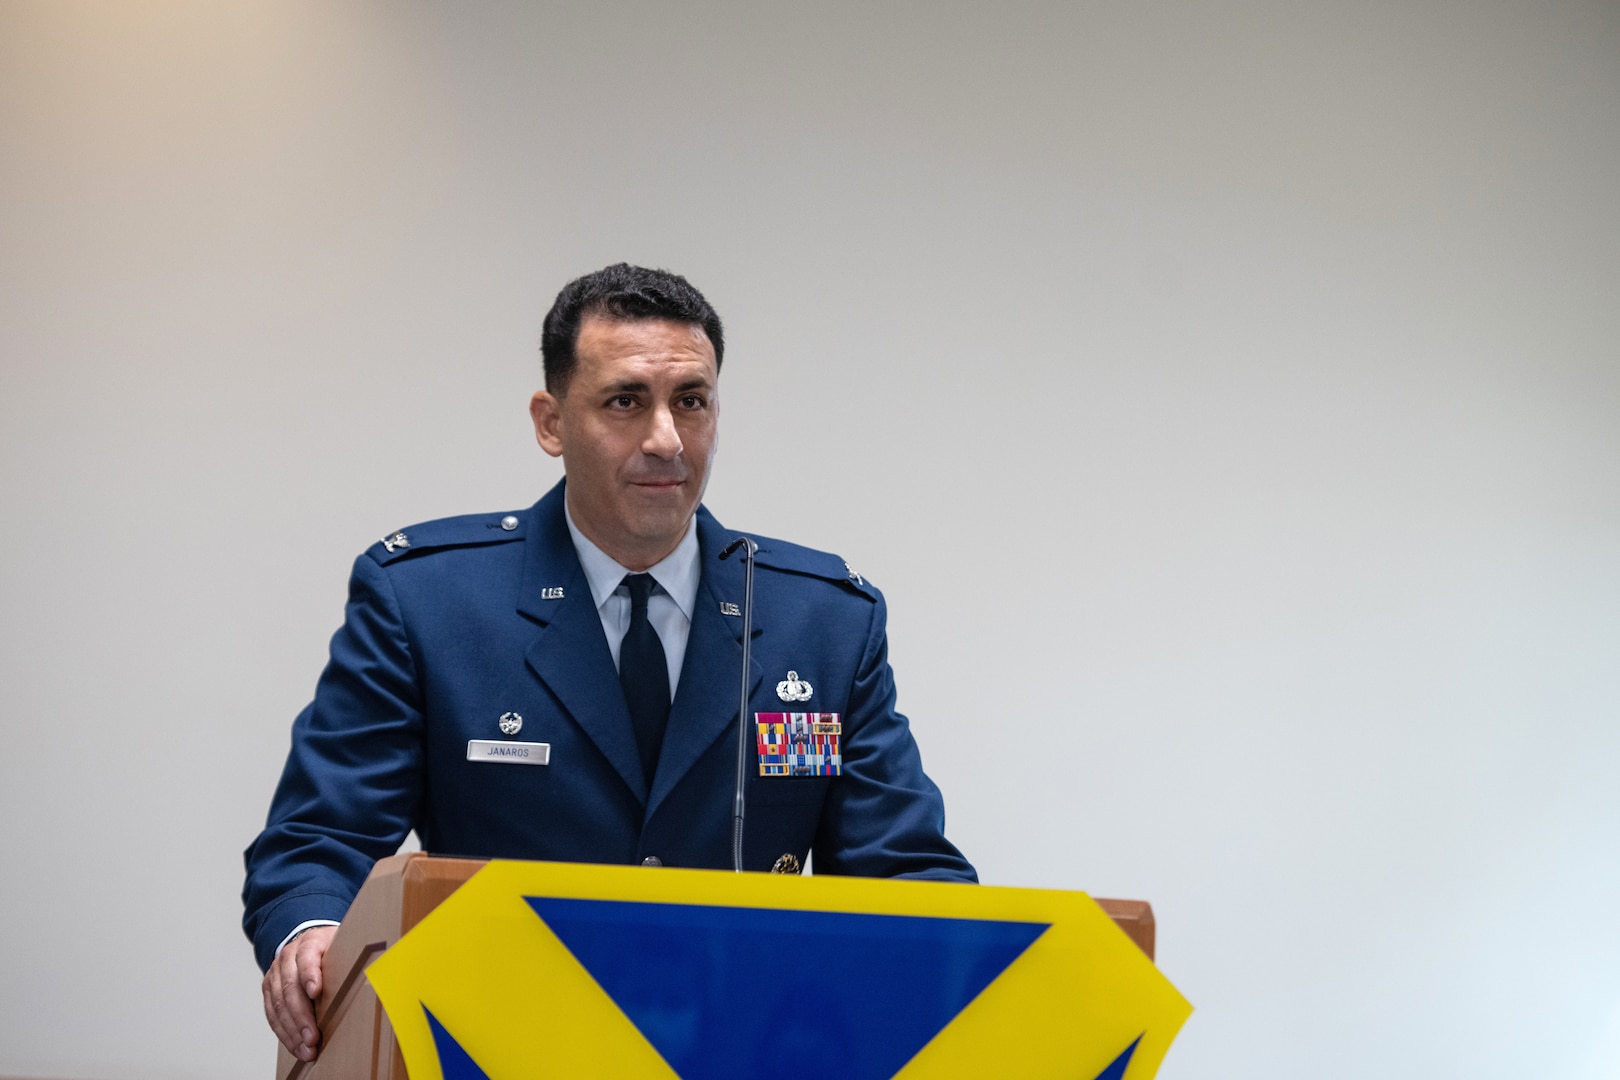 U.S. Air Force Col. Jason Janaros, 37th Training Wing commander, addresses the audience during the change of command ceremony July 15, 2020